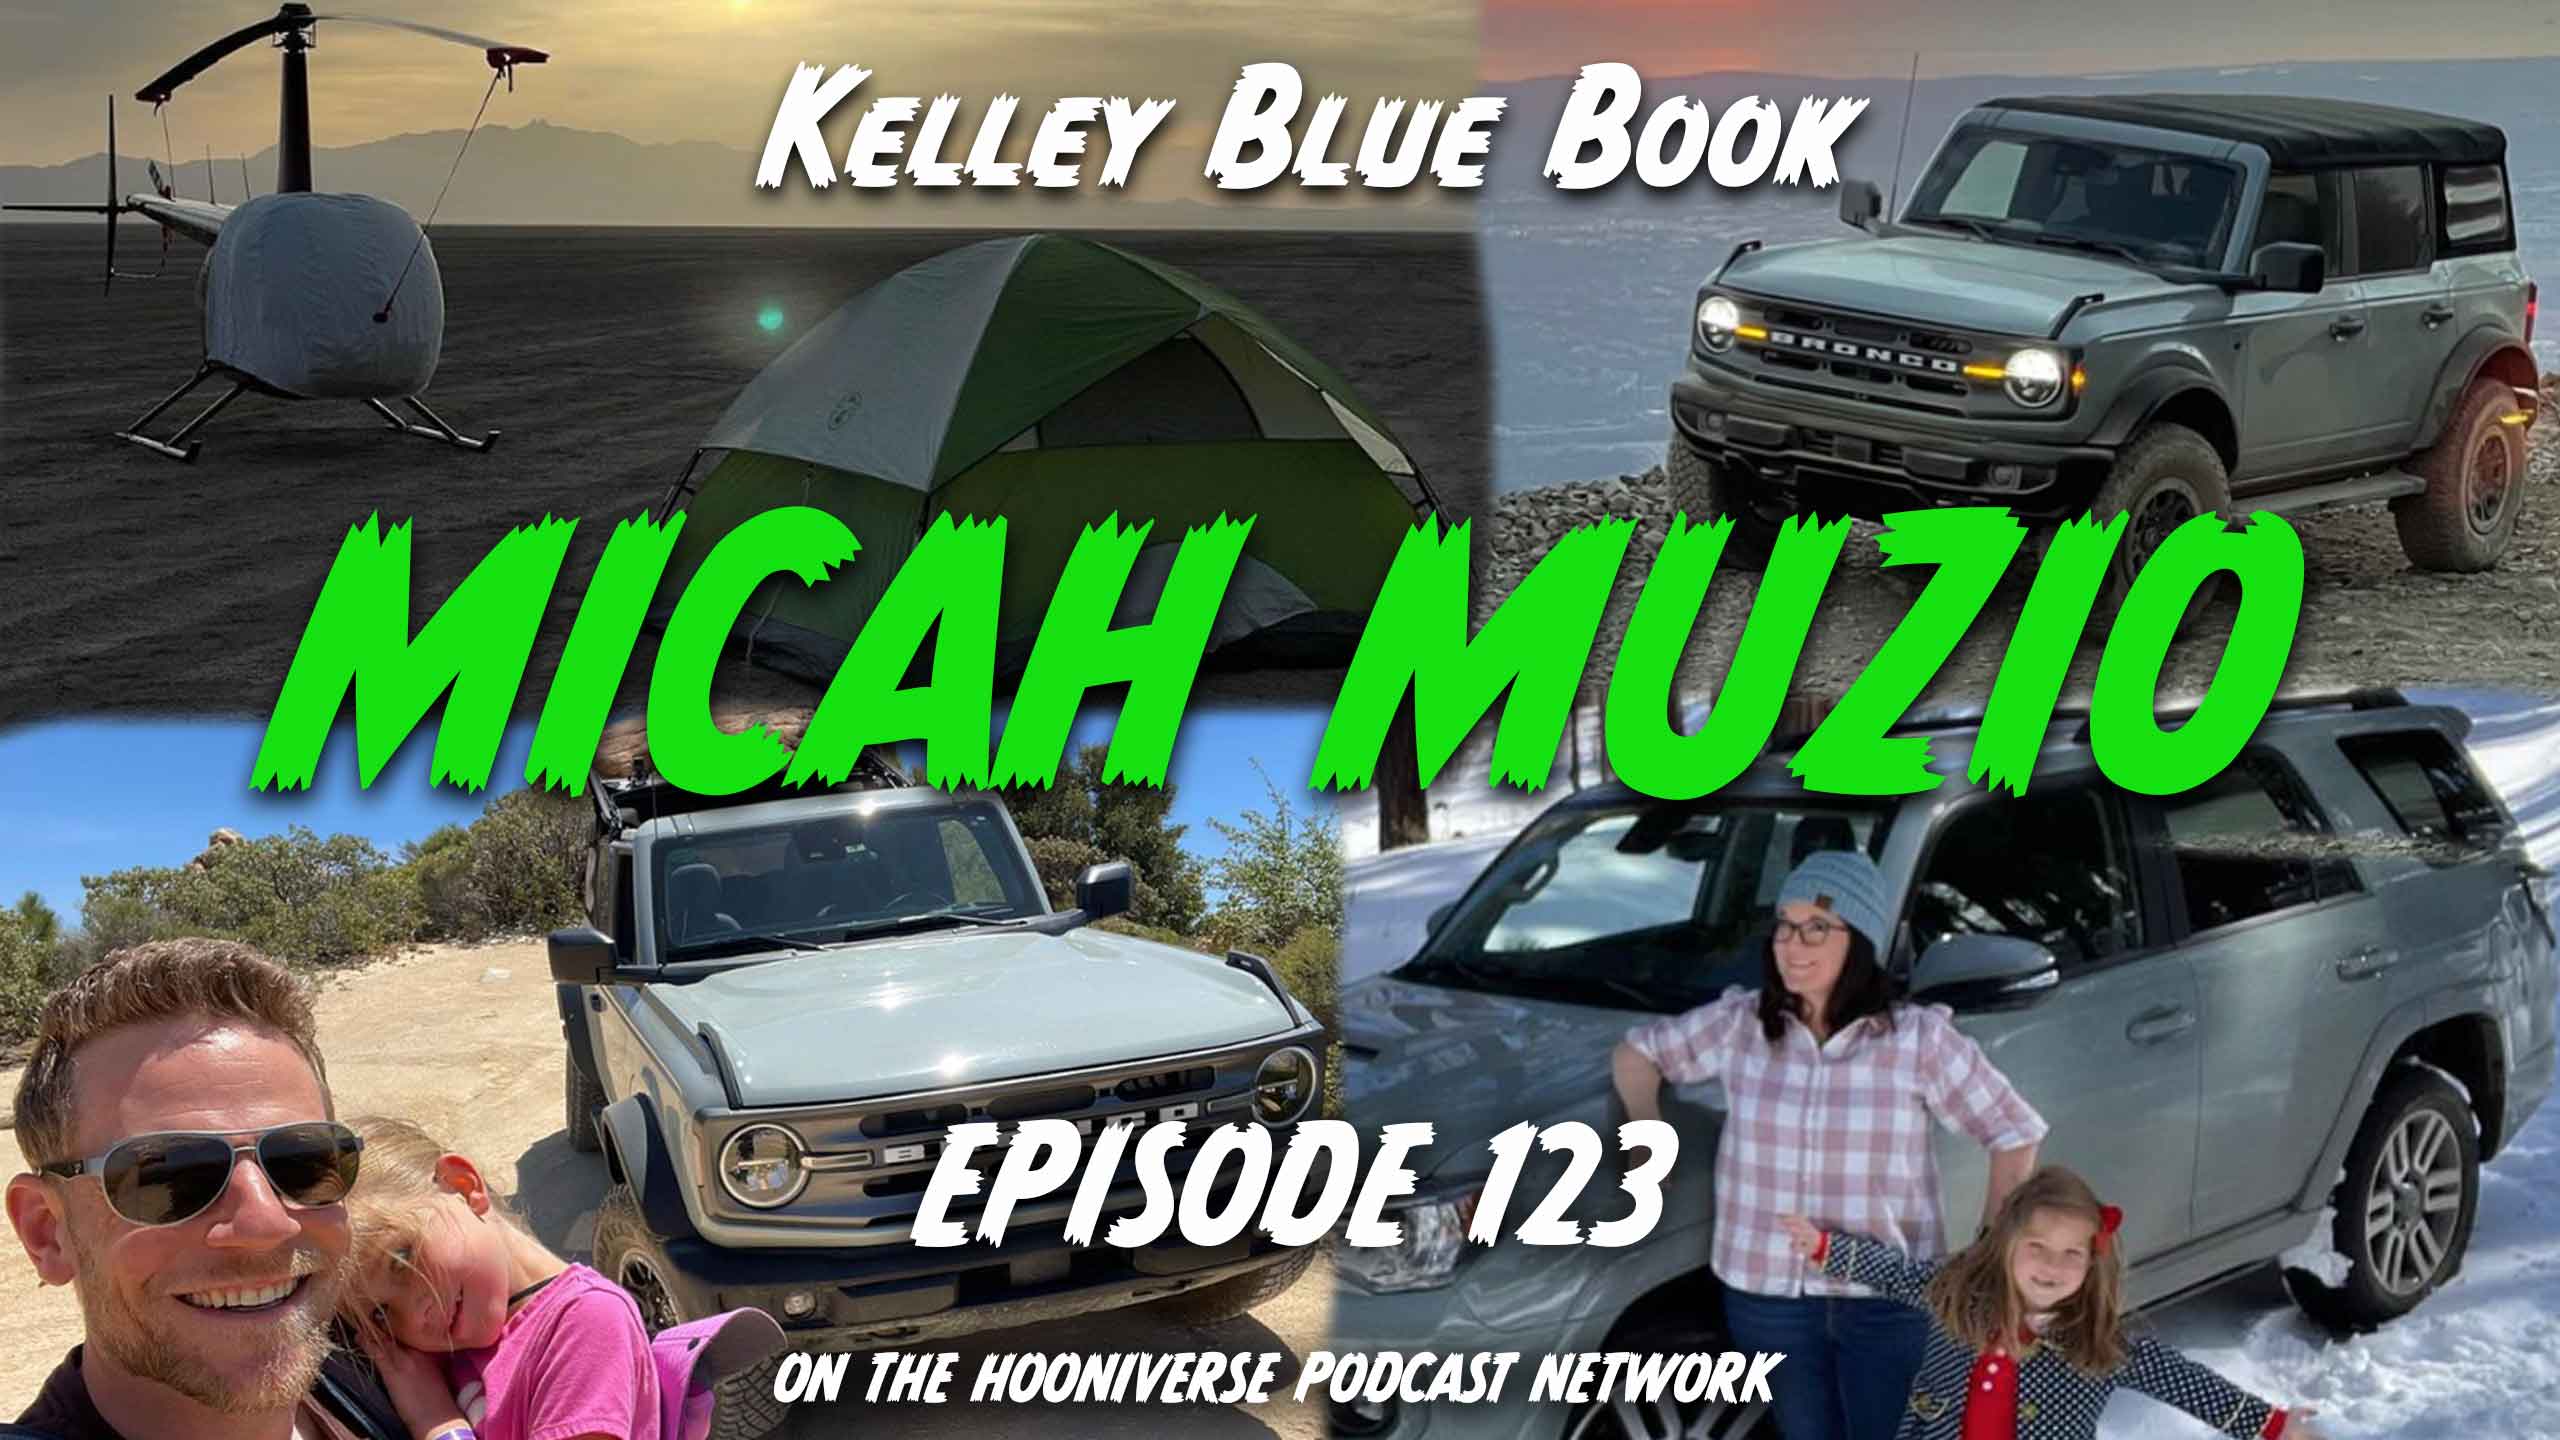 Micah-Muzio-Youtube-Kelley-Blue-Book-Off-The-Road-Again-Podcast-Episode-123